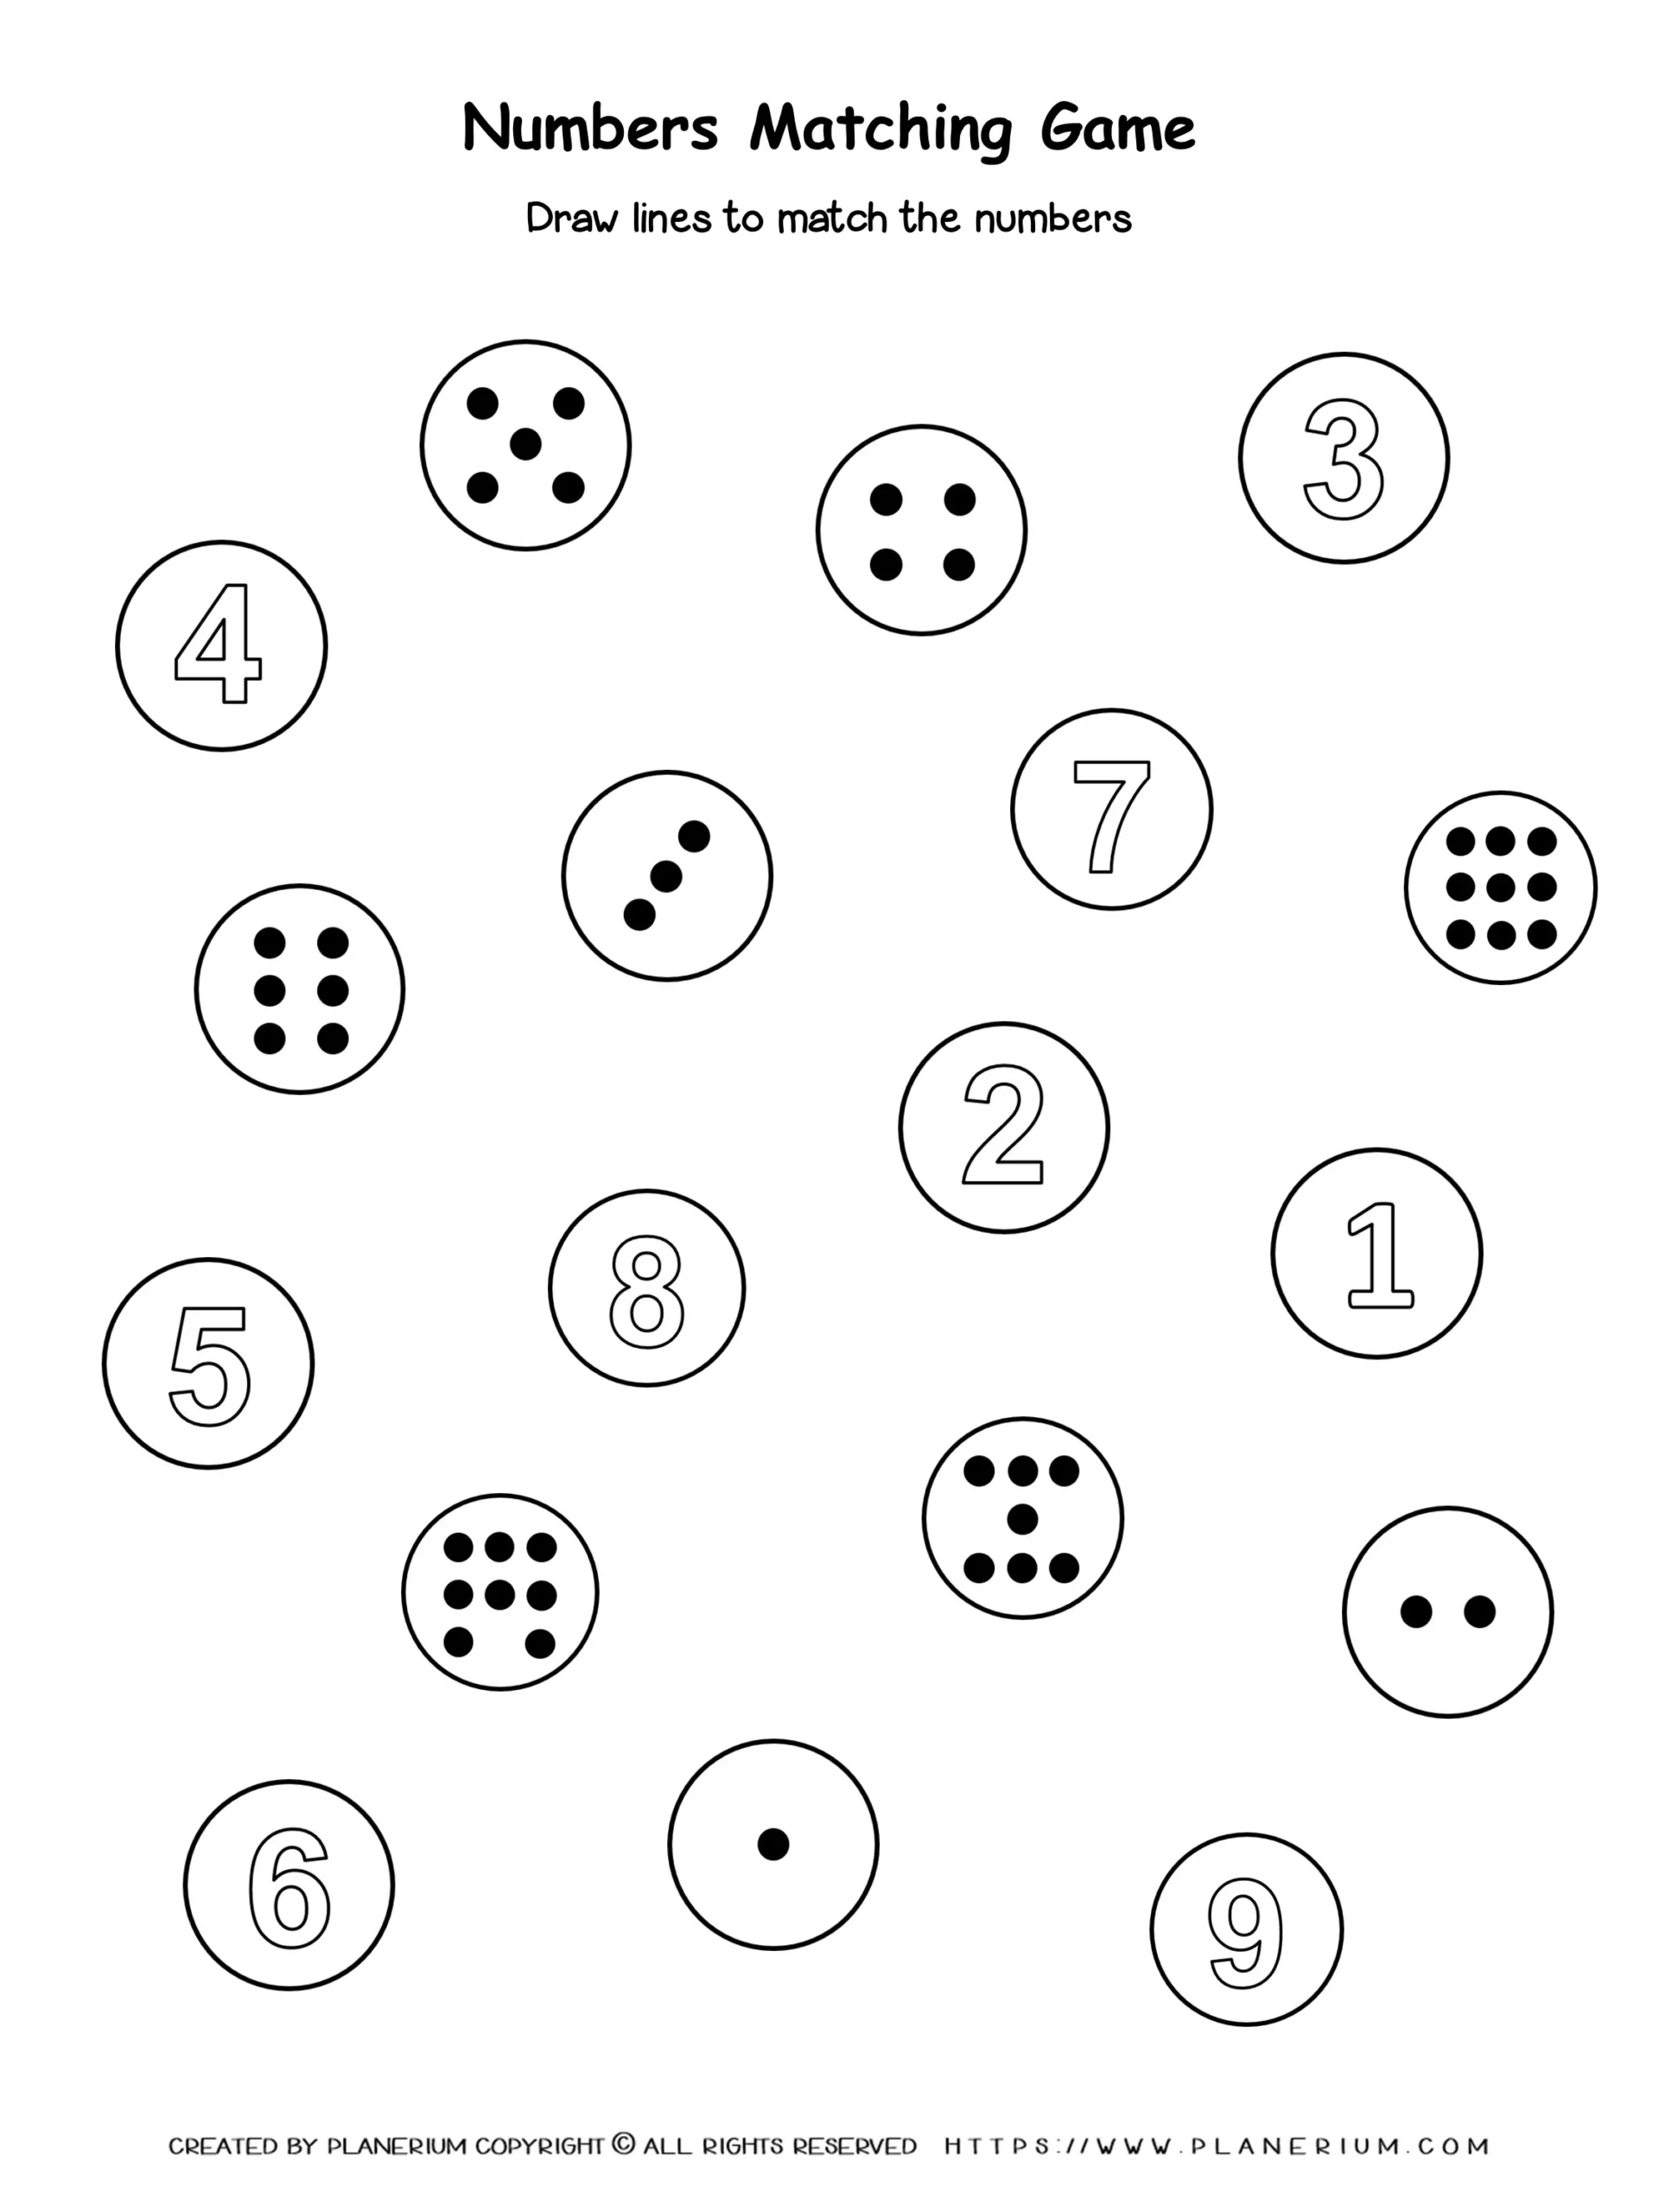 All Seasons - Worksheet - Numbers Matching Game 1 to 9 | Planerium